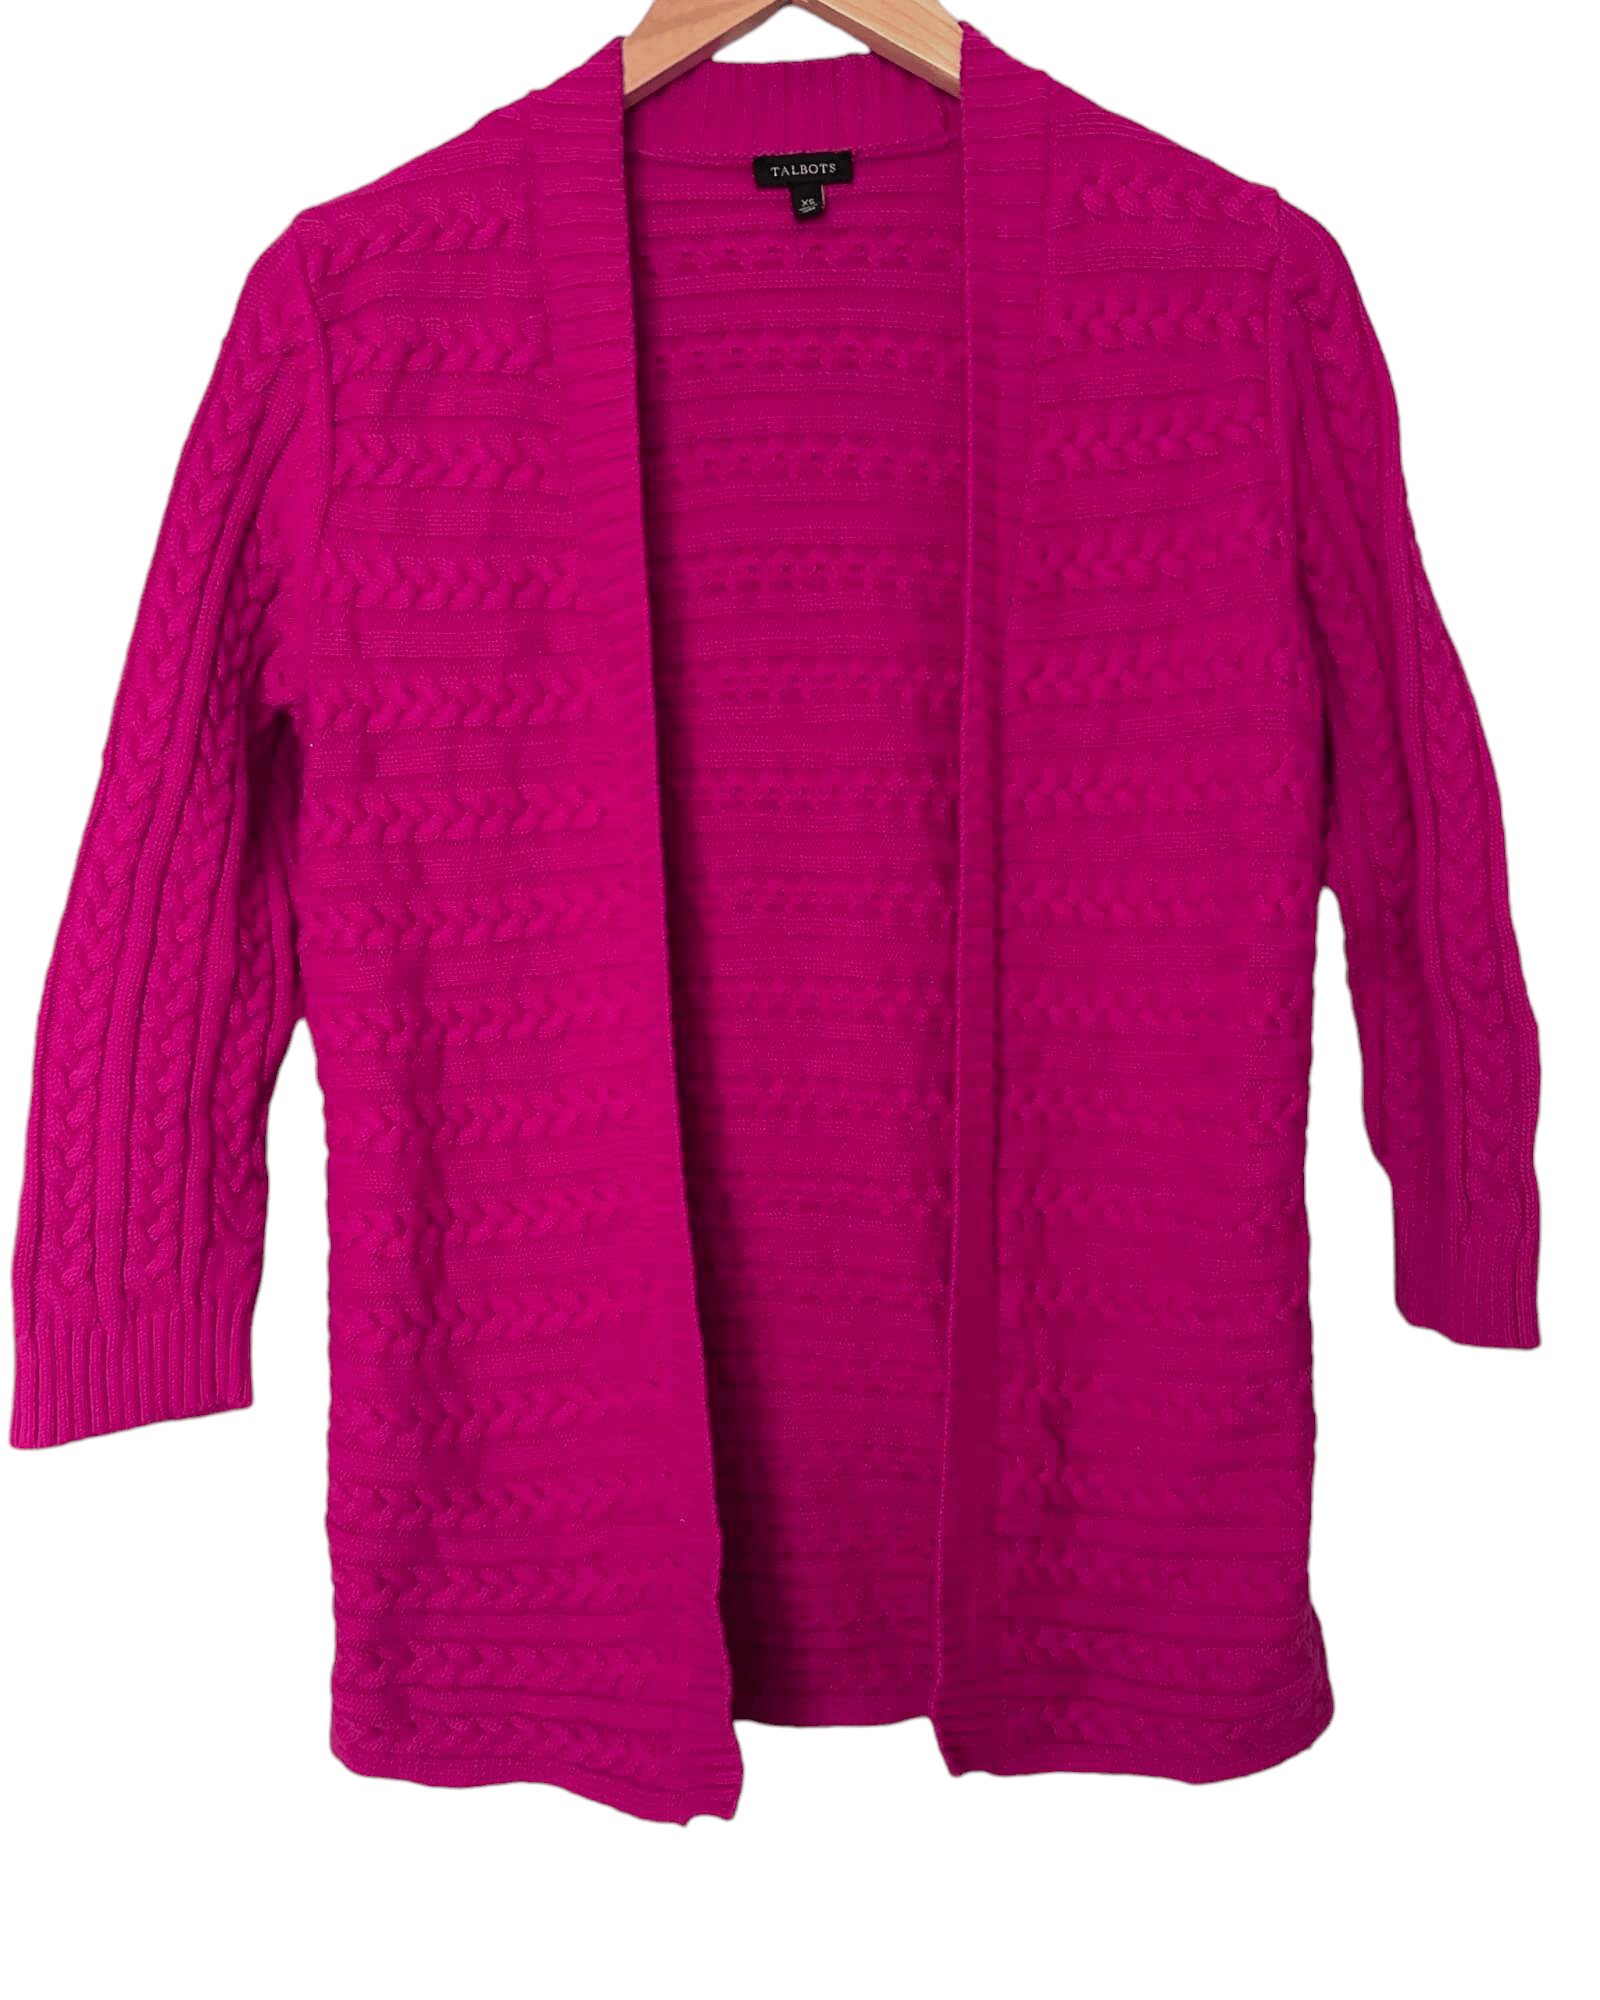 Light Summer TALBOTS raspberry pink open cable knit cardigan sweater